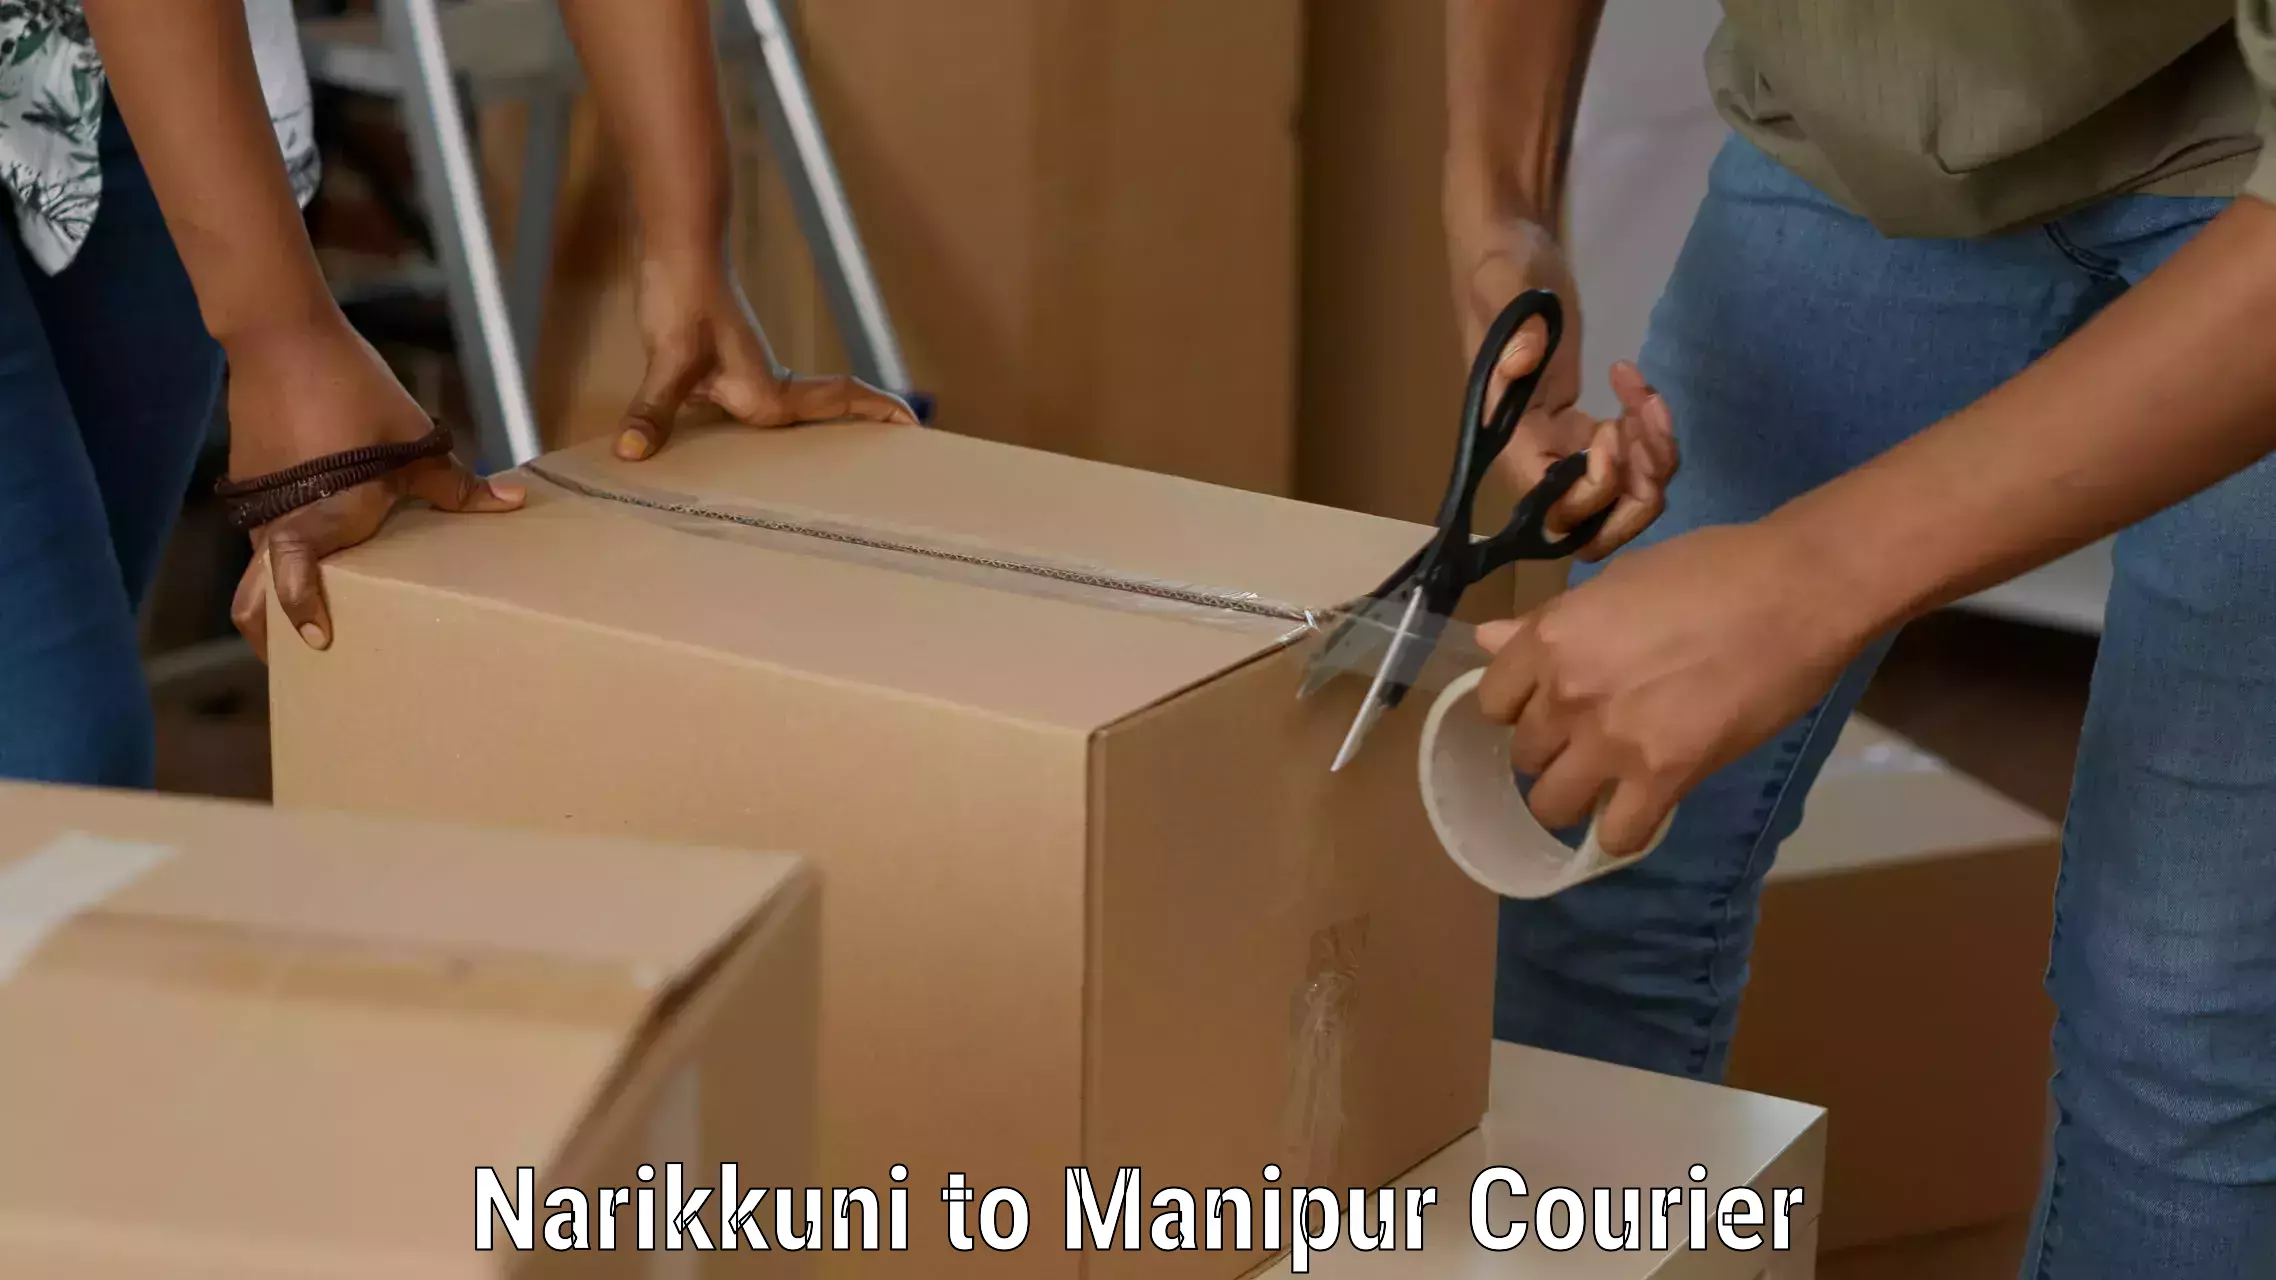 Efficient courier operations Narikkuni to Manipur